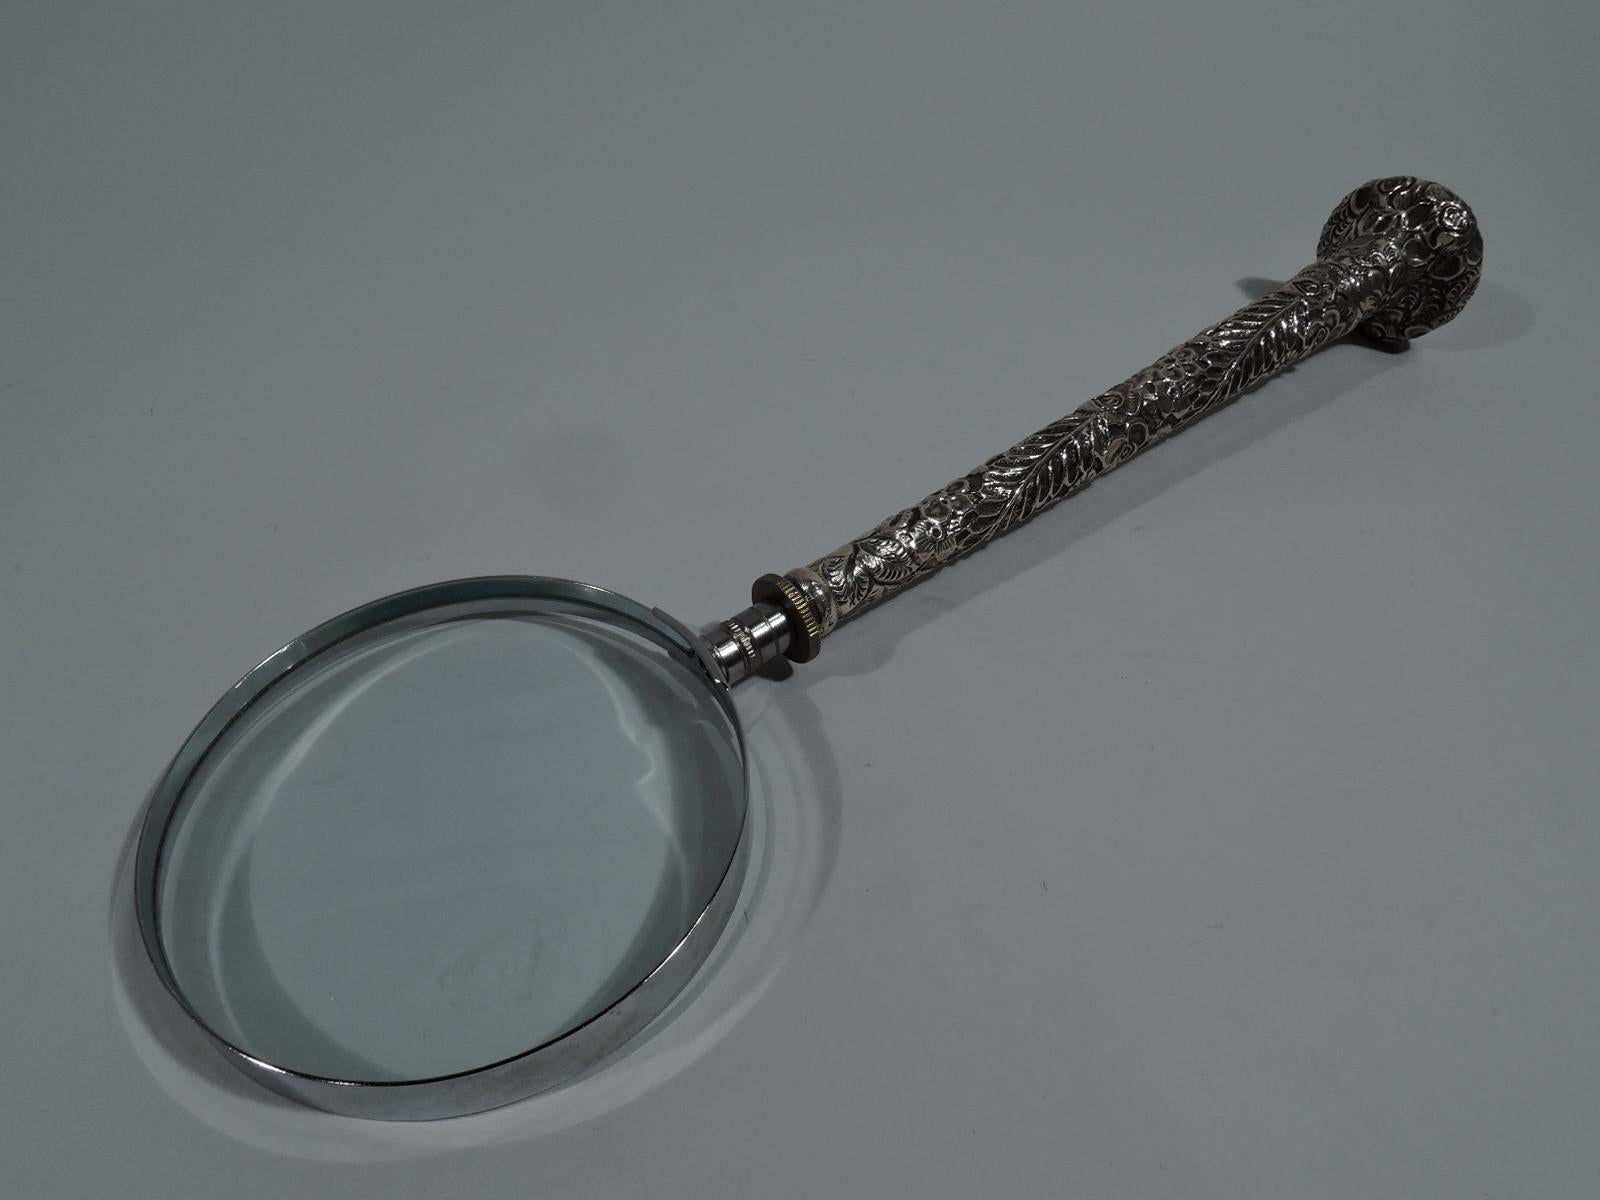 Antique American sterling silver magnifying glass, circa 1900. Long tapering handle with allover floral repousse. Circular mono plate (vacant) at handle end. Circular lens in stainless steel frame. A great desk accessory. Hallmarked.